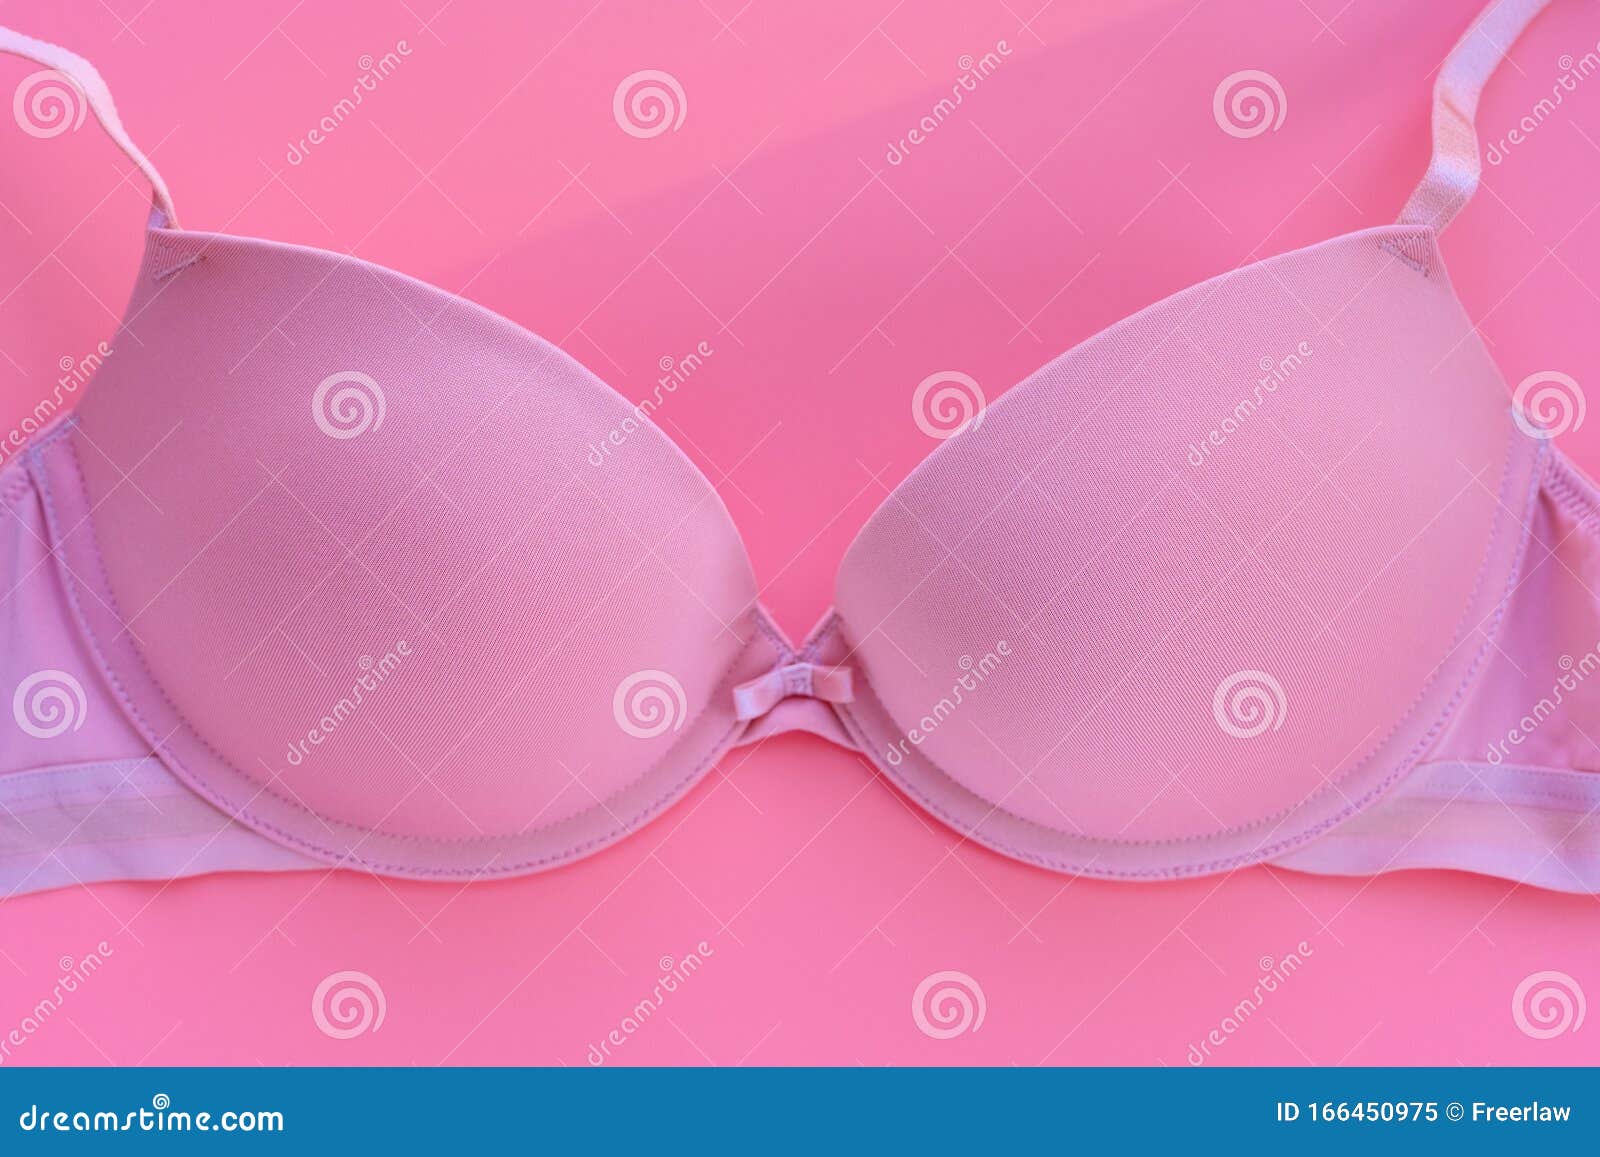 Pink Bra for Women Close Up on a Pink Background Stock Image - Image of ...